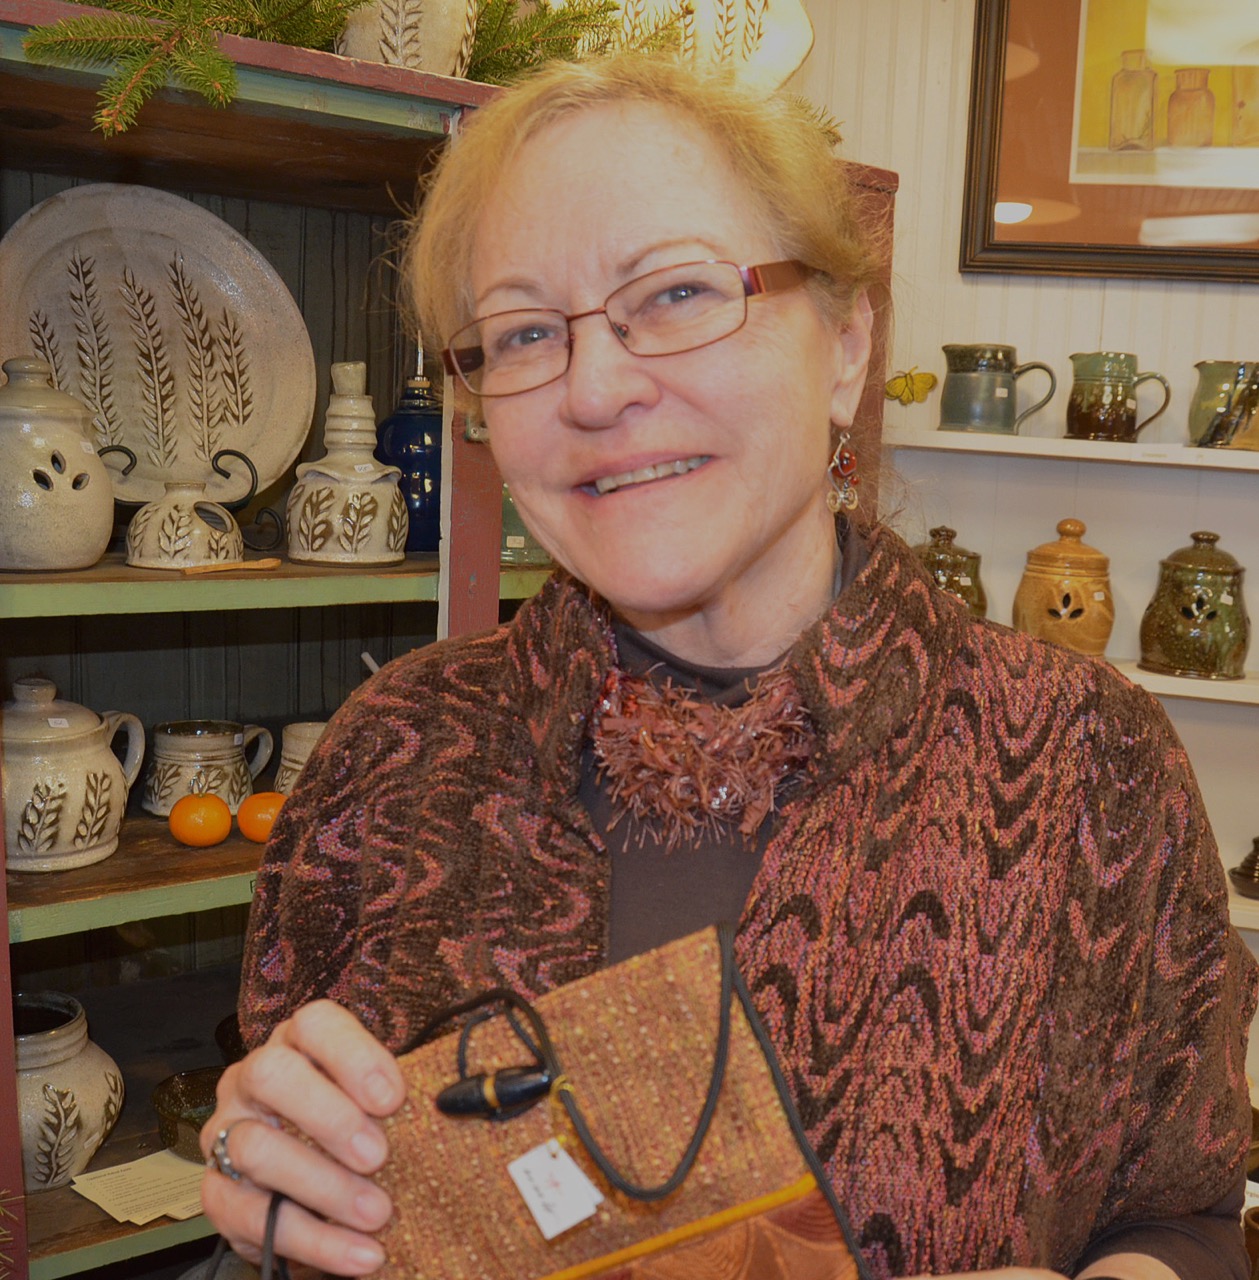 Mary Kenesson, Board Member of the Loudoun Arts Council and fiber artist